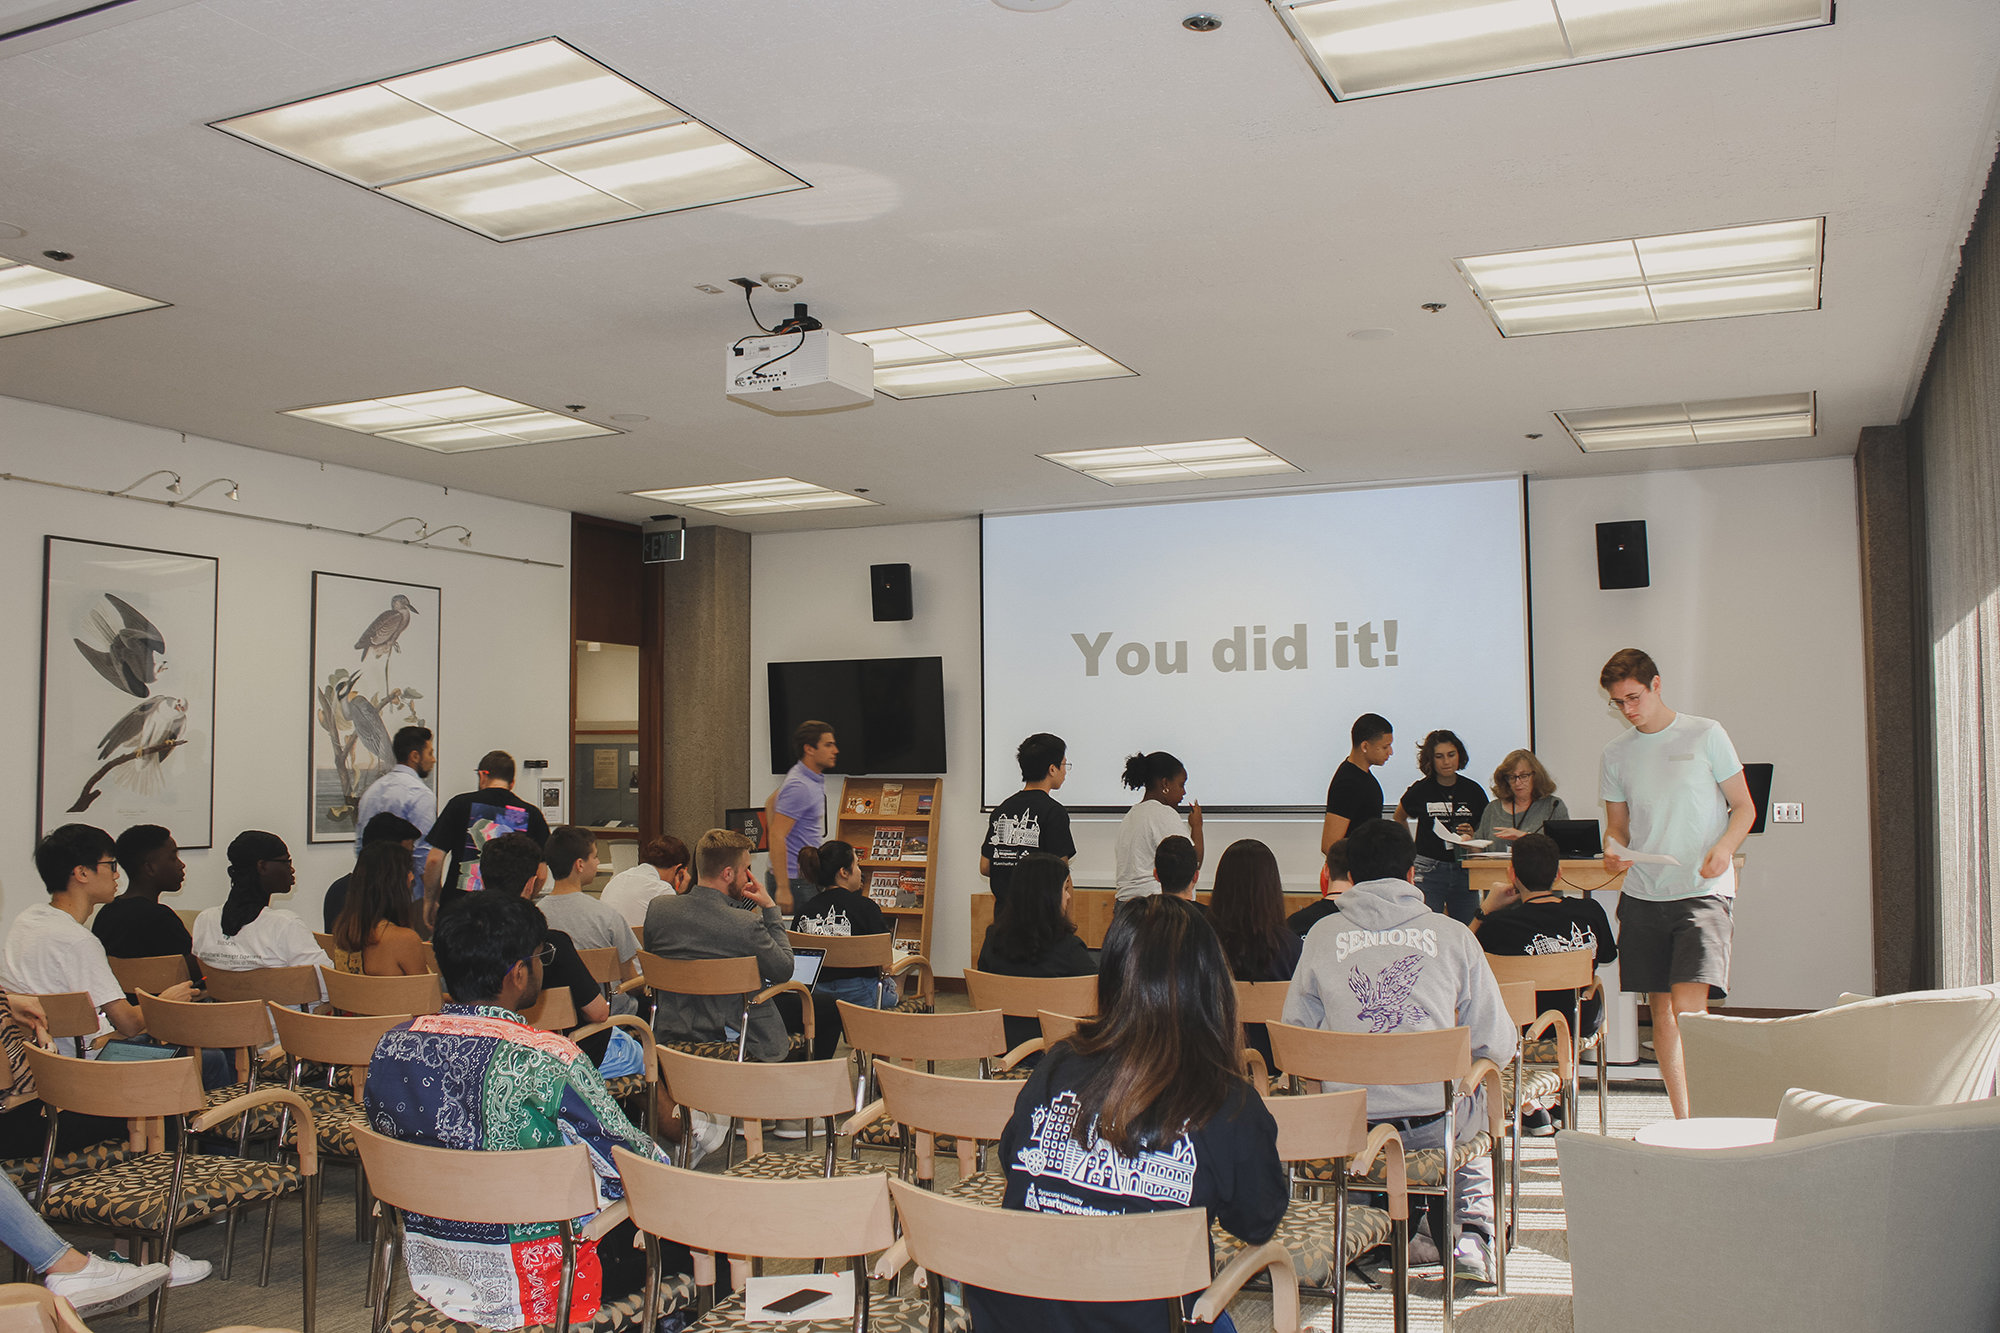 Students at the end of Startup Weekend with a slide that reads "You Did It!"